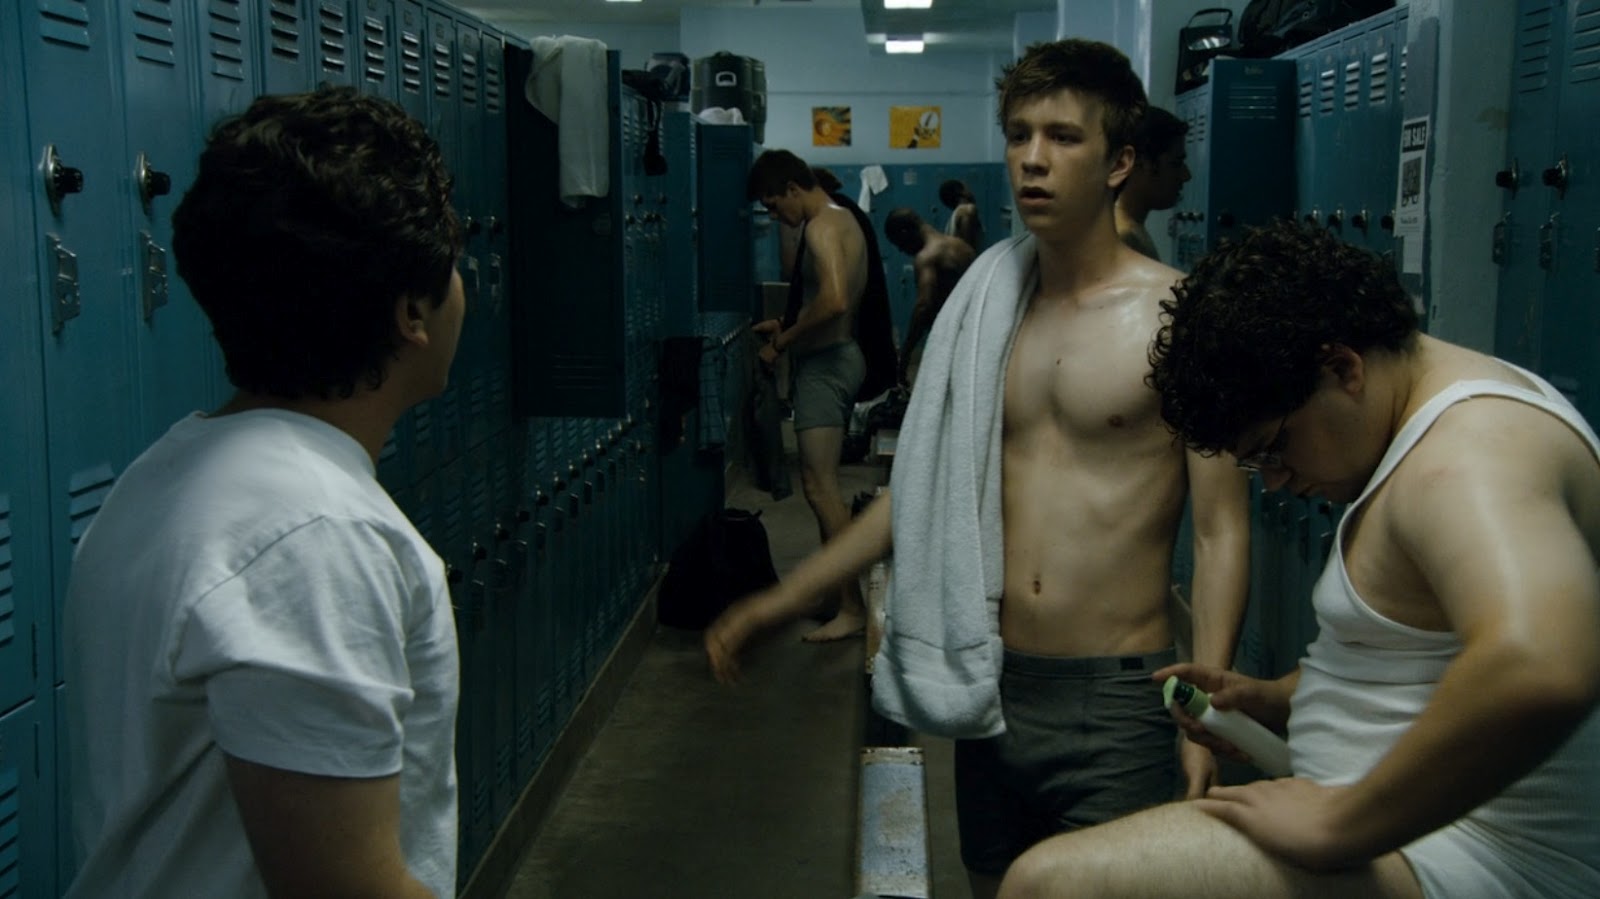 Thomas Mann - Shirtless & Naked in "Project X" .